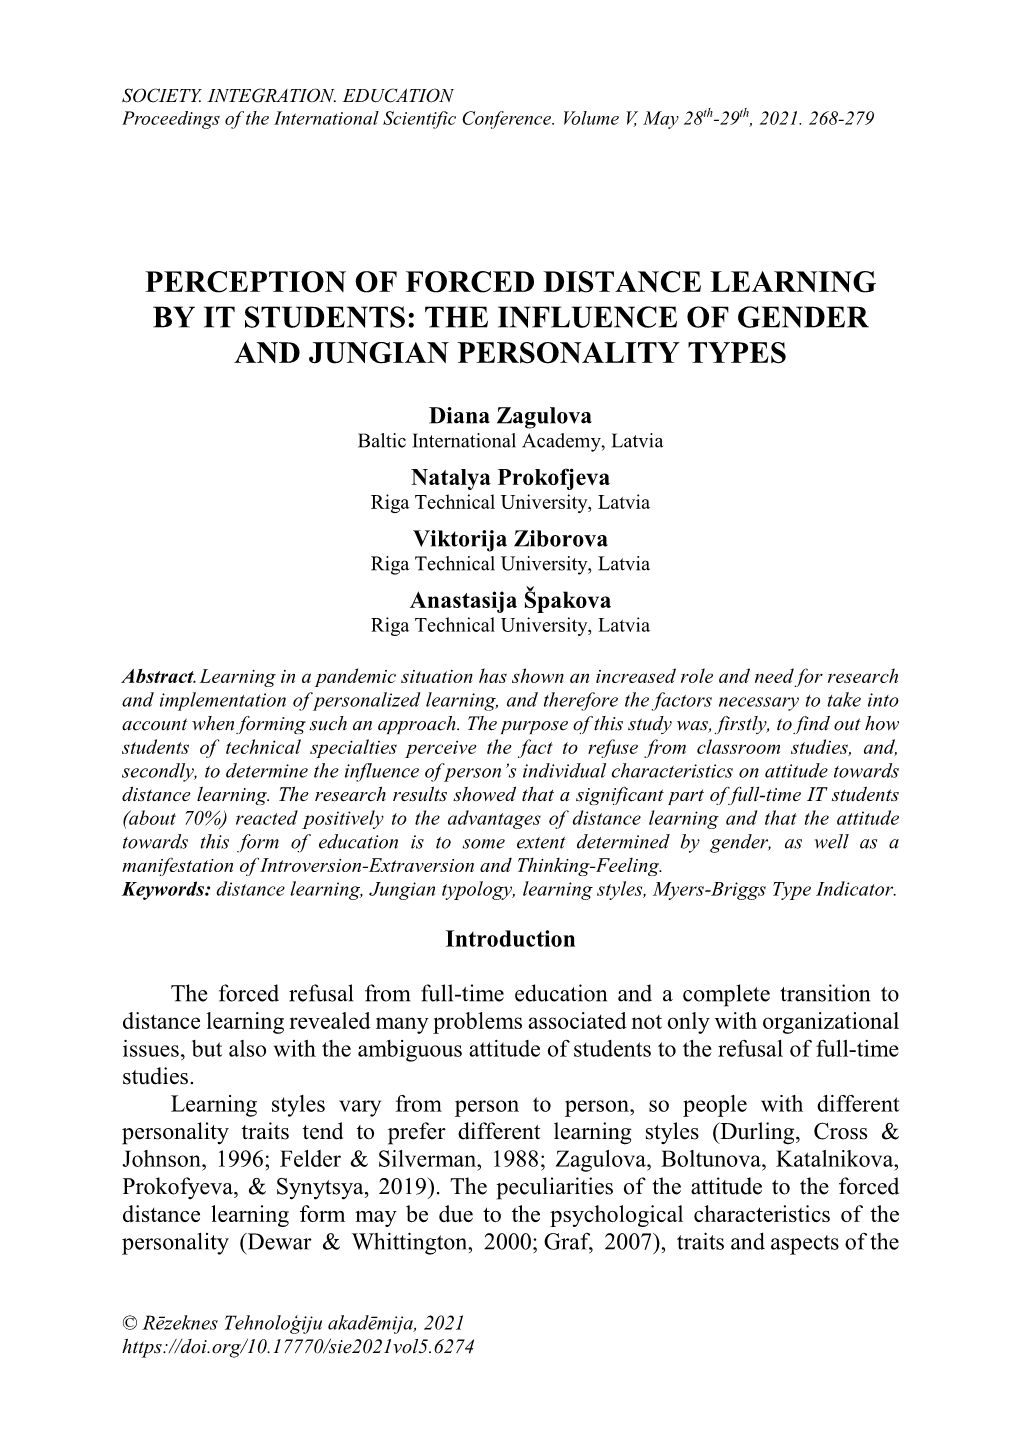 Perception of Forced Distance Learning by It Students: the Influence of Gender and Jungian Personality Types